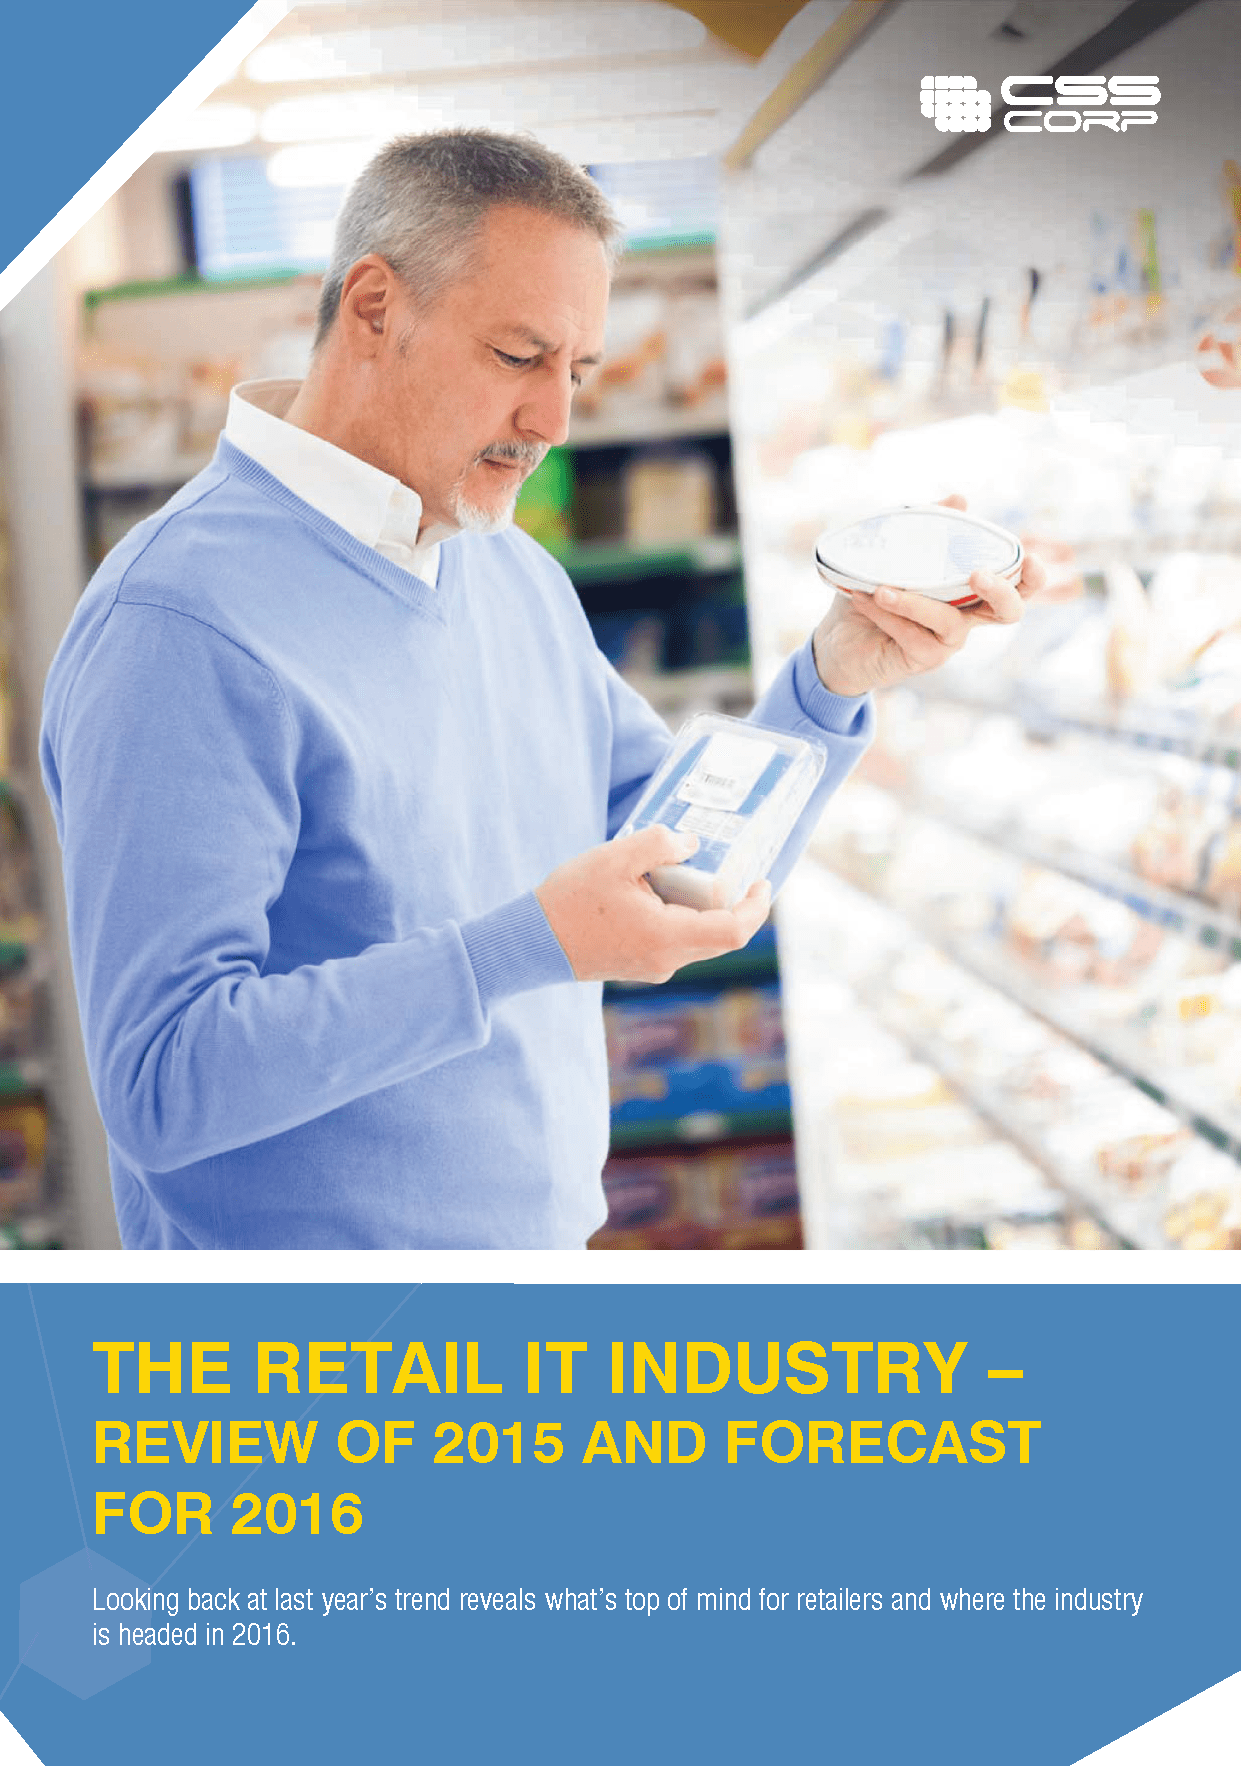 The retail IT industry